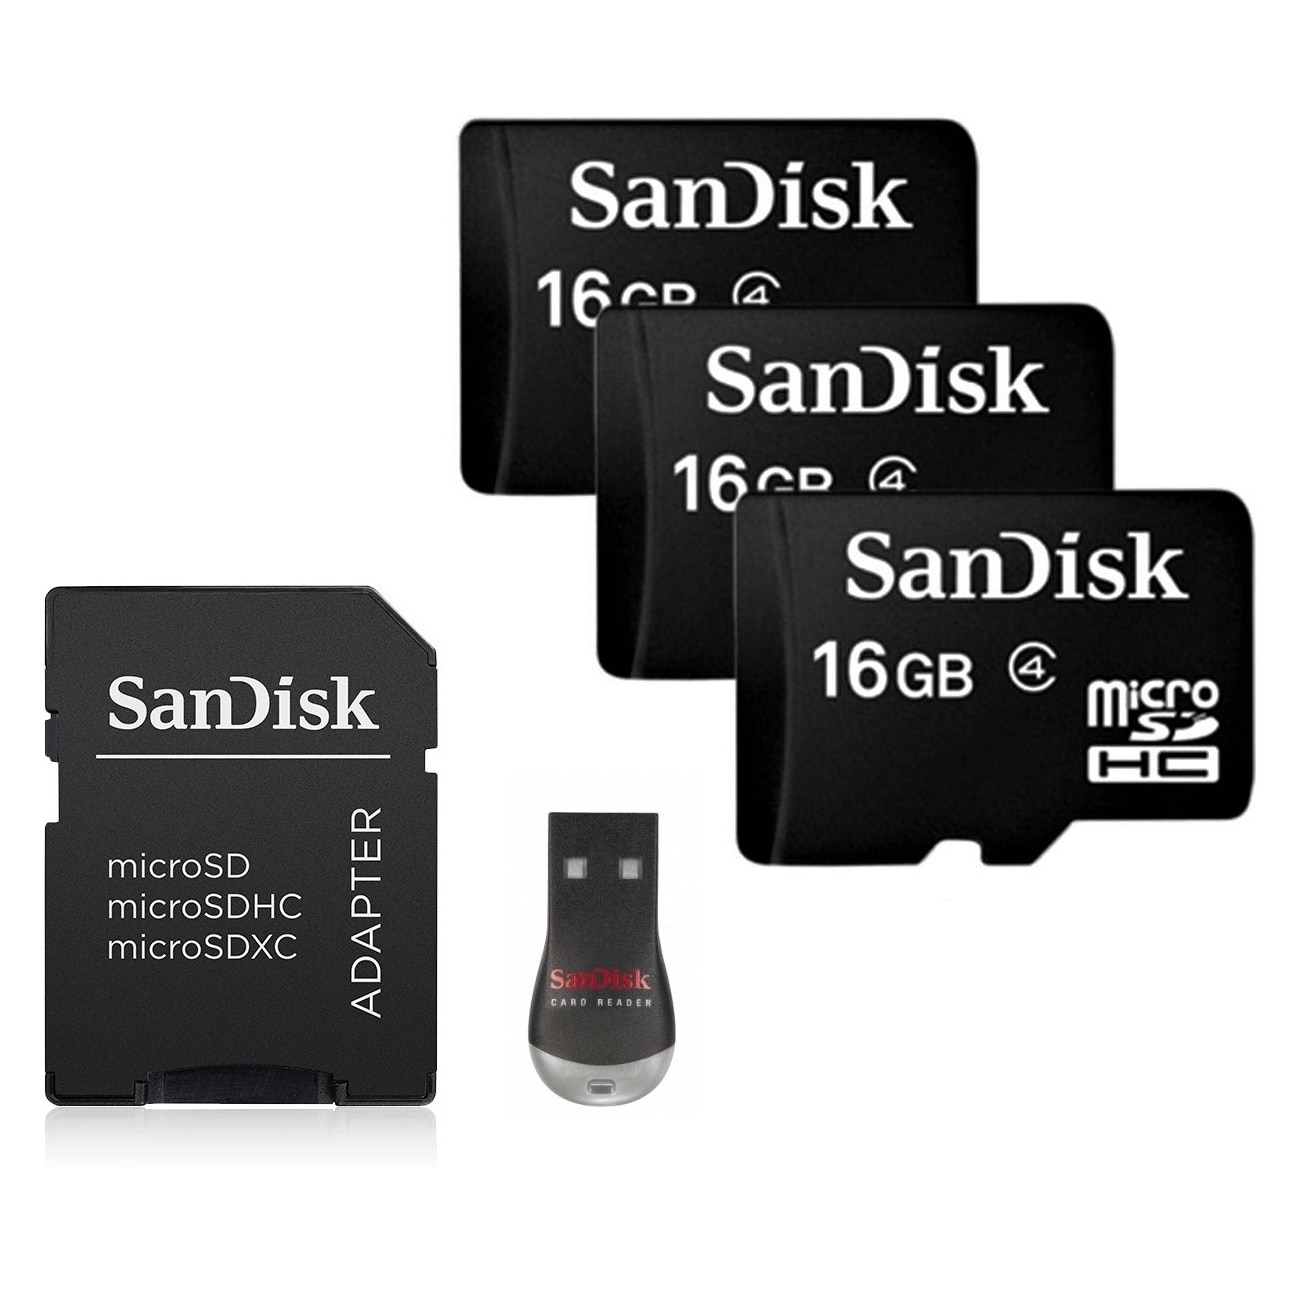 3 Pack - SanDisk 16GB Micro SD Card with SD Adapter and USB Reader